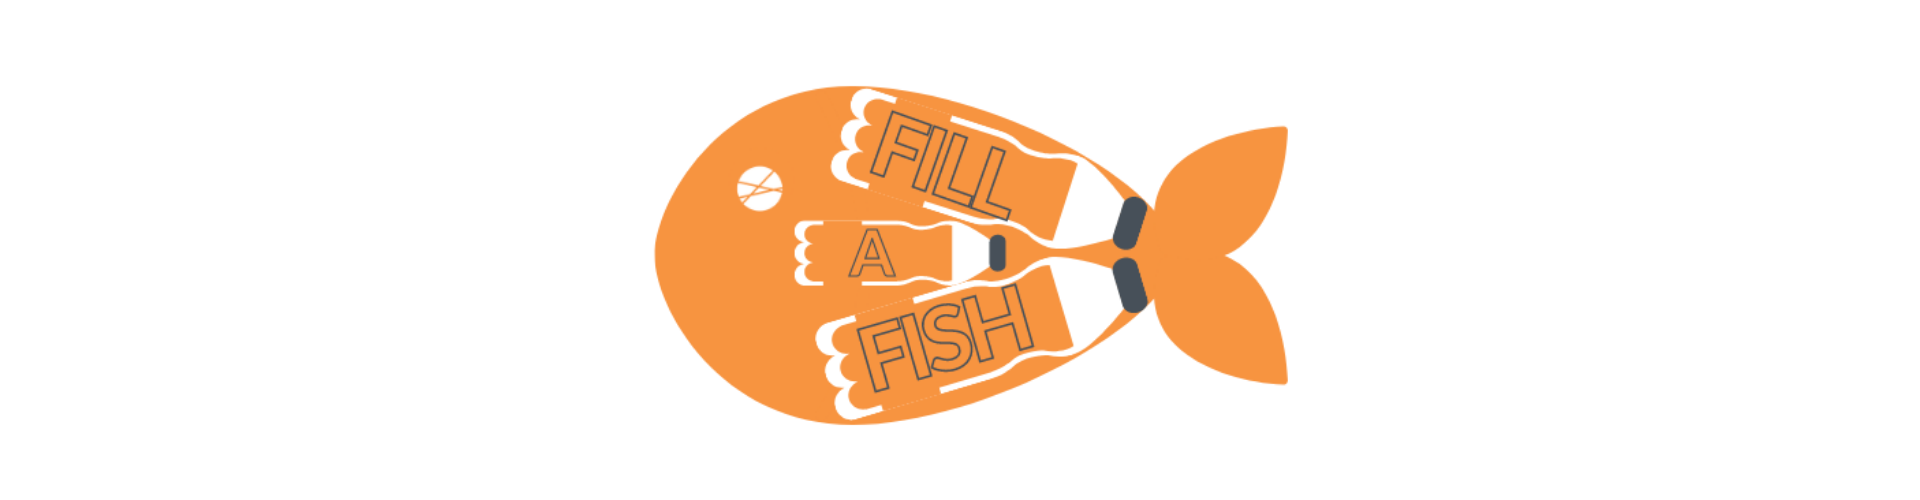 Fill a Fish for web